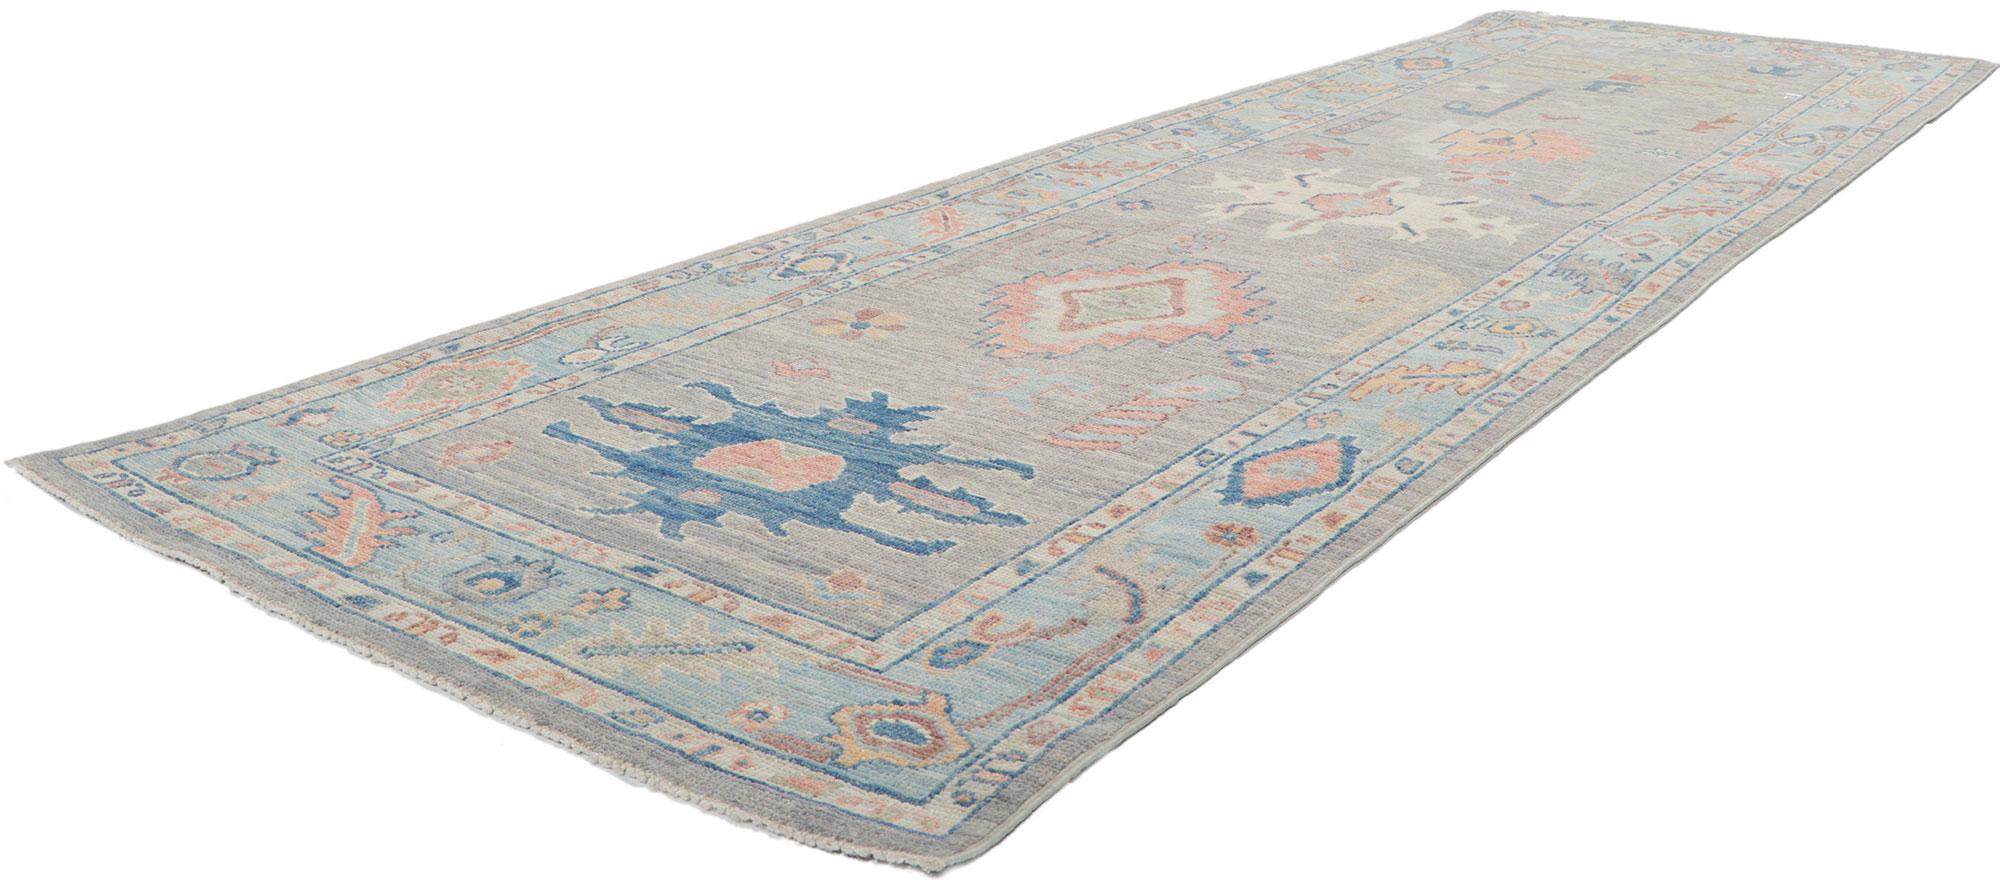 80858 New colorful Oushak runner, 03'00 x 09'11. ?Serene and sophisticated, this hand knotted wool colorful Oushak runner is poised to impress. The composition features an allover botanical pattern composed of amorphous organic motifs spread across